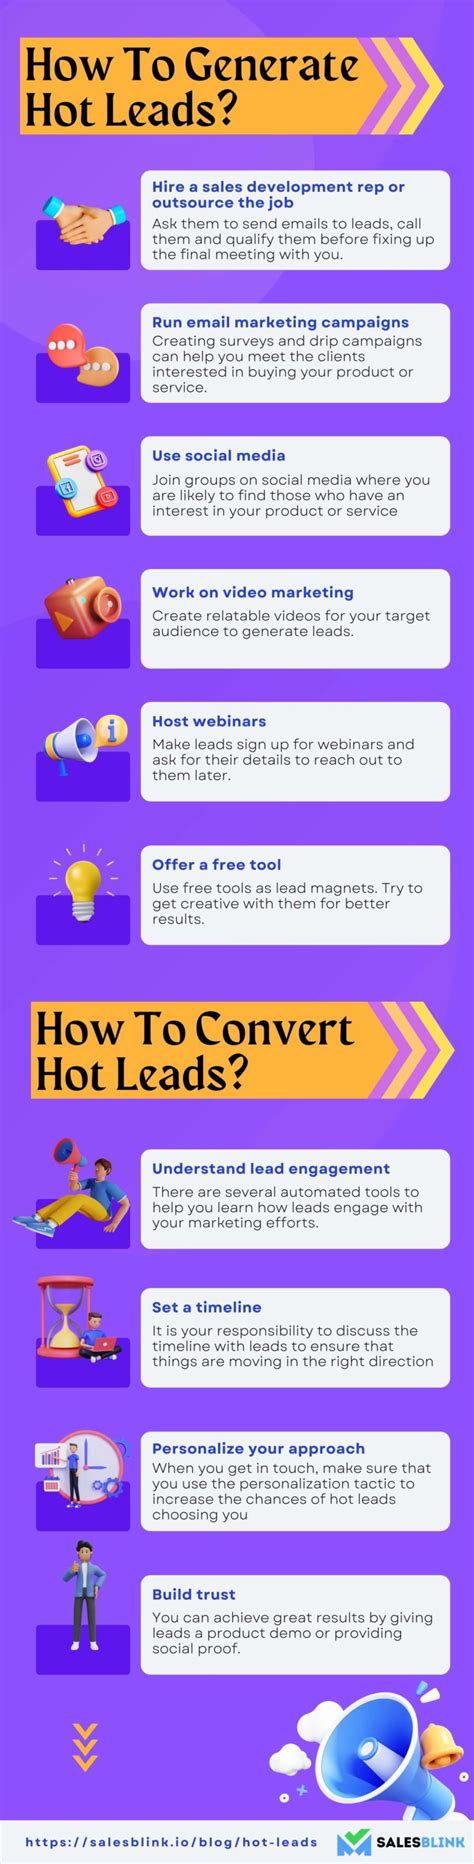 Hot Leads How To Generate And Convert Them Effectively